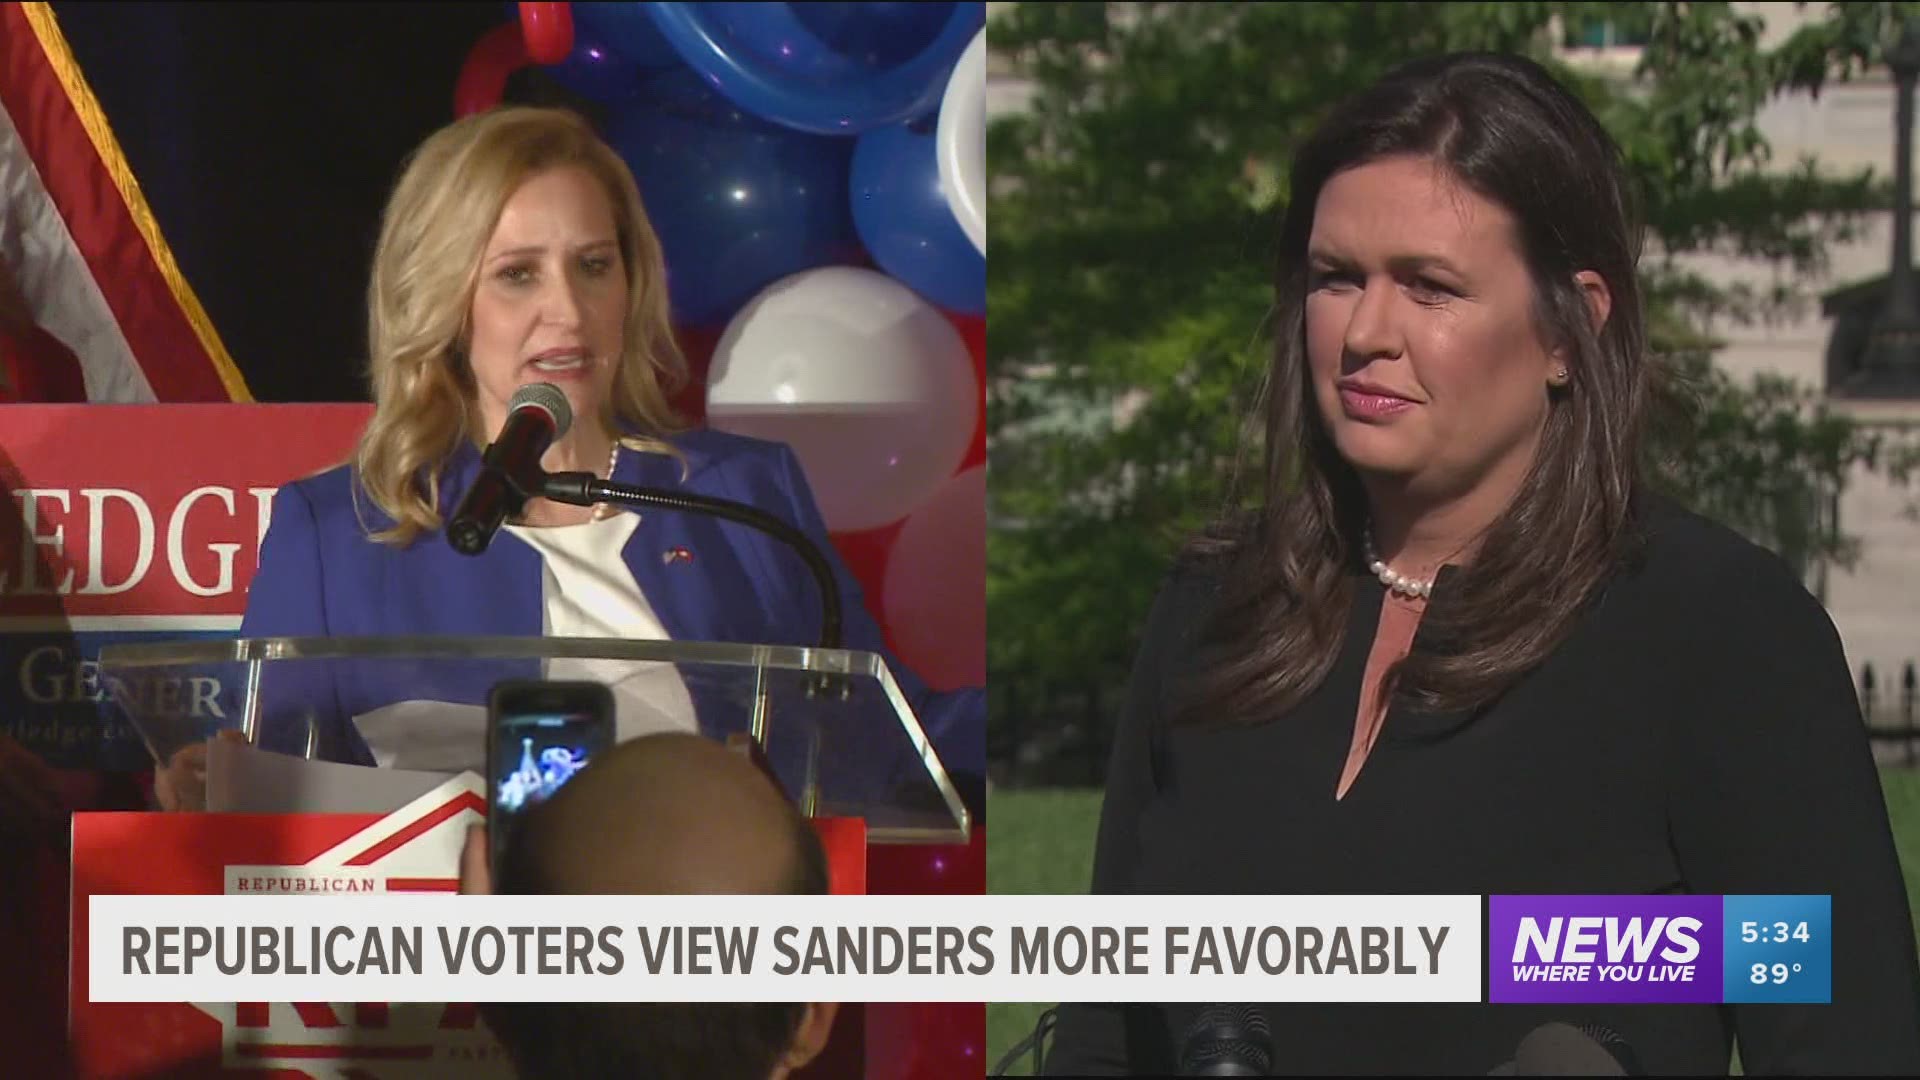 11 months until they may square off in a GOP primary for Arkansas Governor, Sarah Huckabee Sanders is viewed more favorably by voters than Attorney General Leslie R.